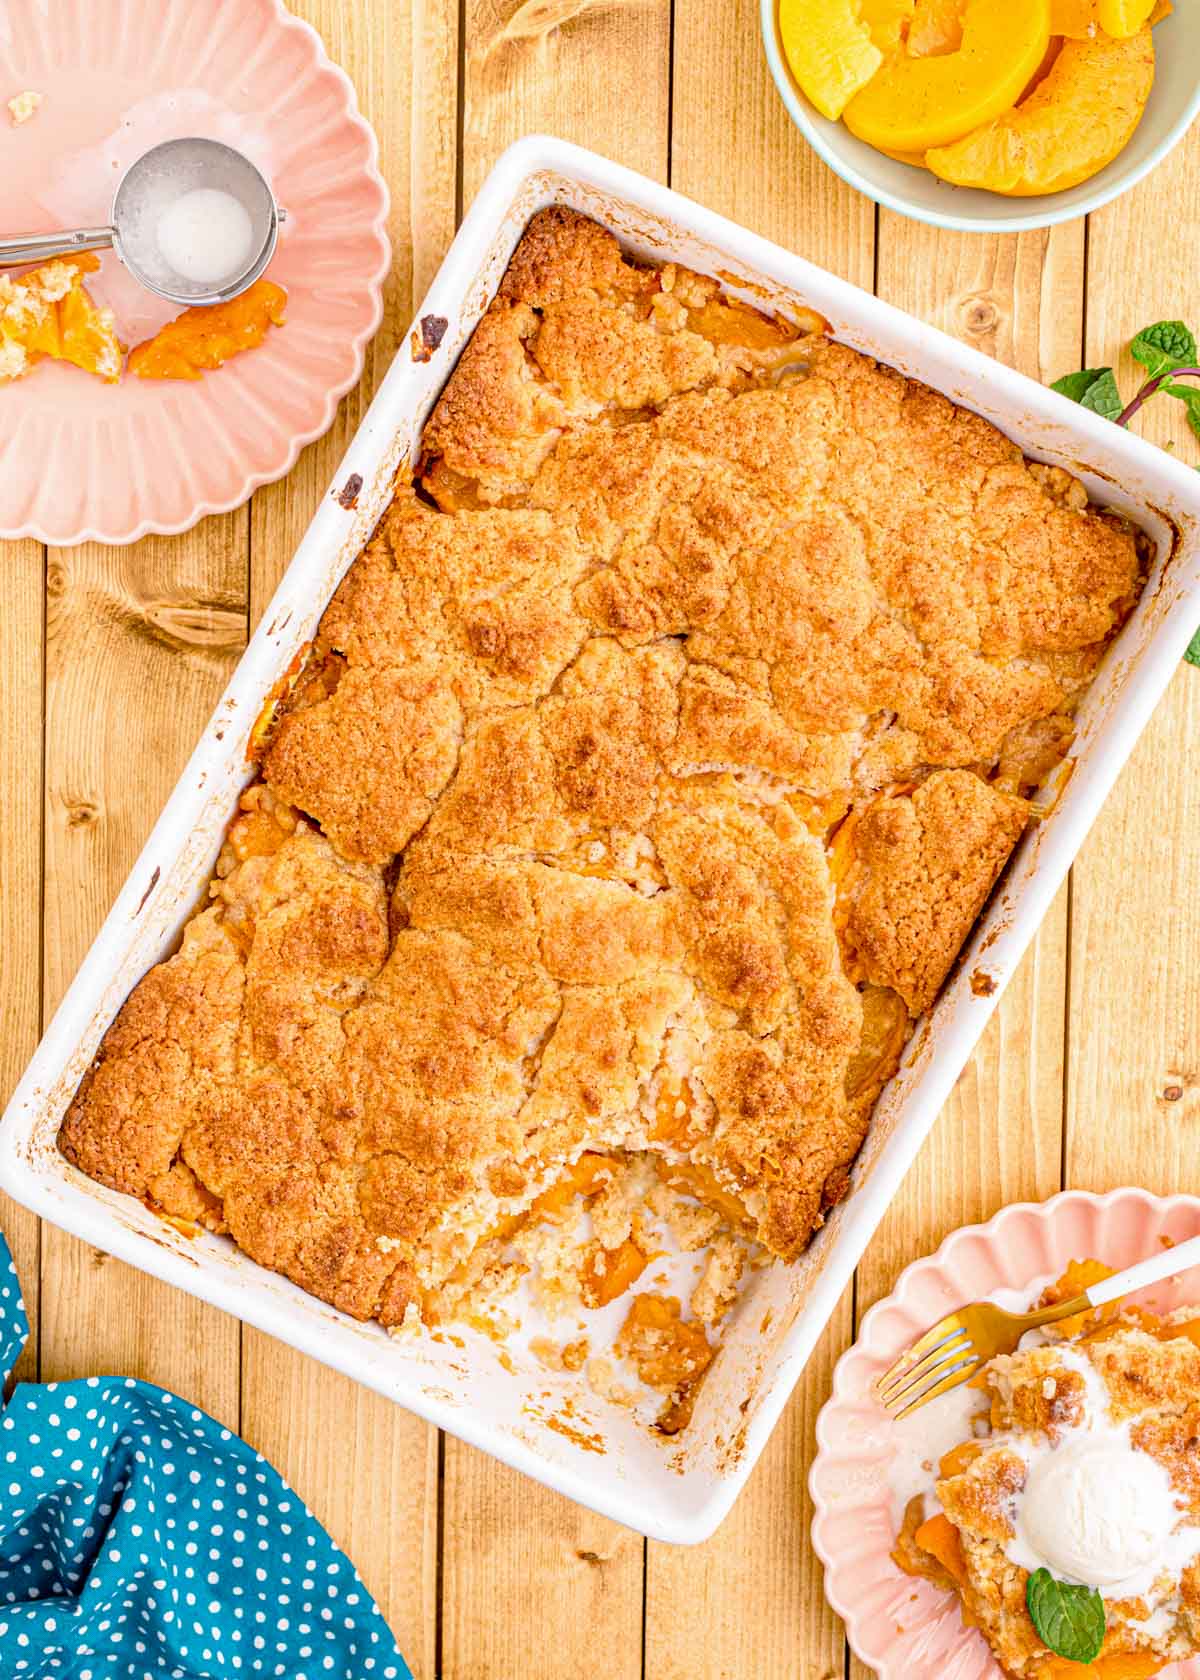 Peach cobbler in a white baking dish on a wooden table.